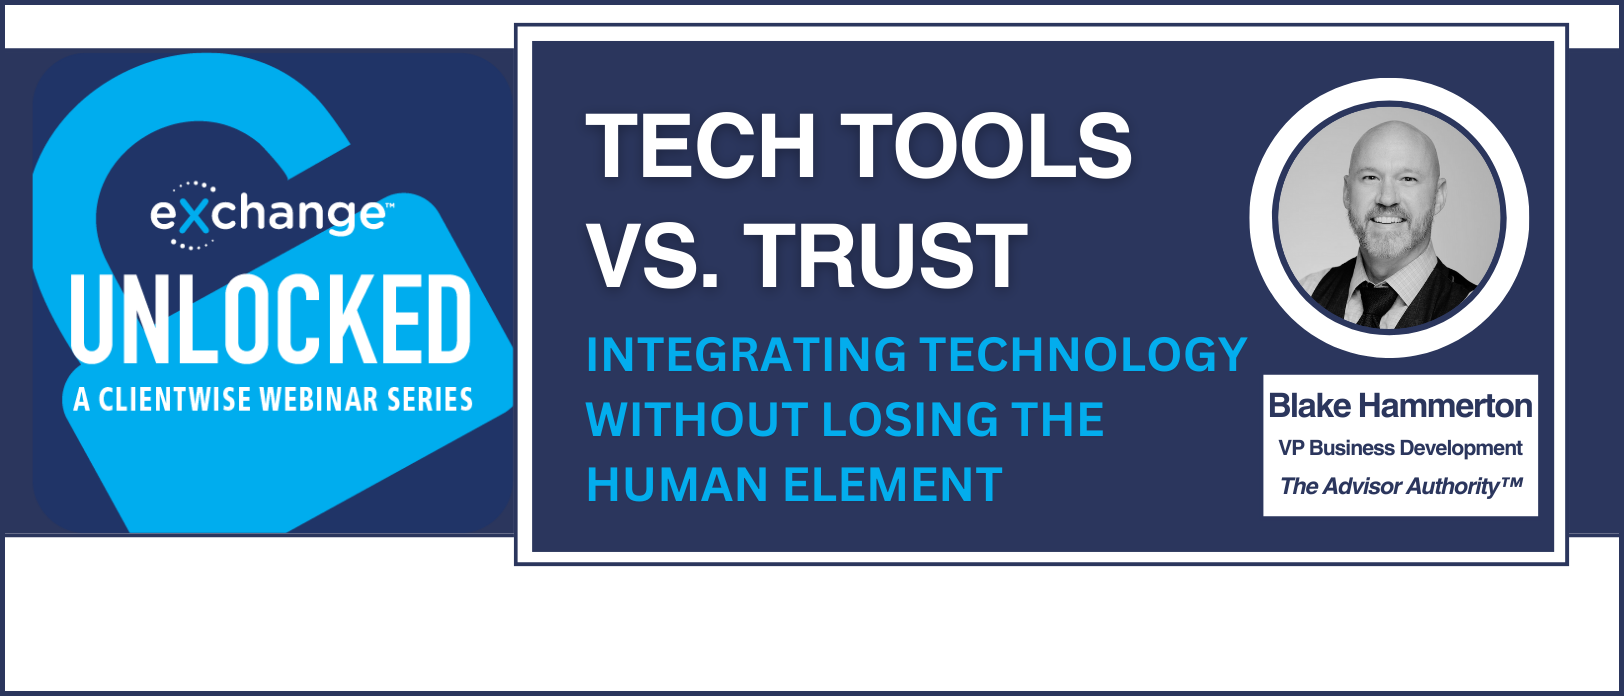 ClientWise eXchange™ Unlocked-Tech Tools vs. Trust: Integrating Technology Without Losing the Human Element